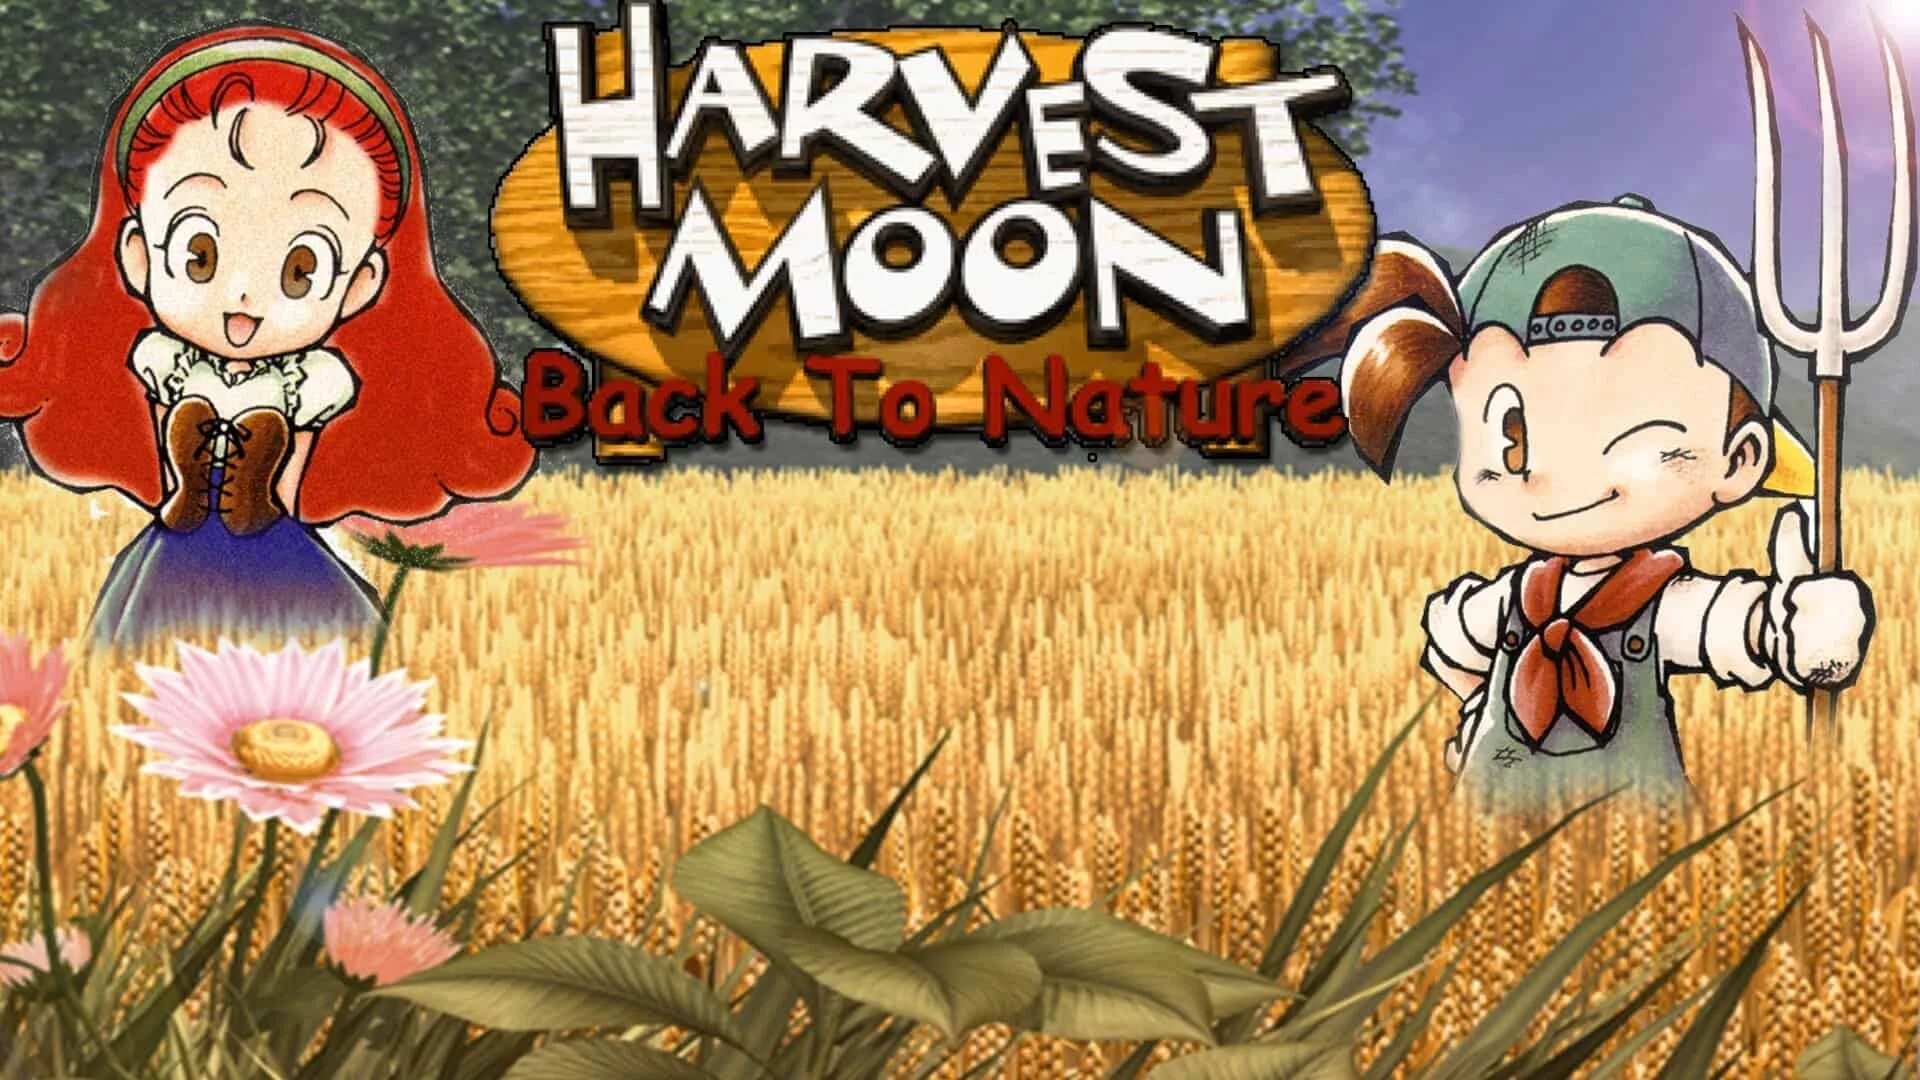 Harvest Moon: back to nature ps1. Harvest Moon ps1. Мак Harvest Moon. Harvest Moon геймплей. Harvest moon bot